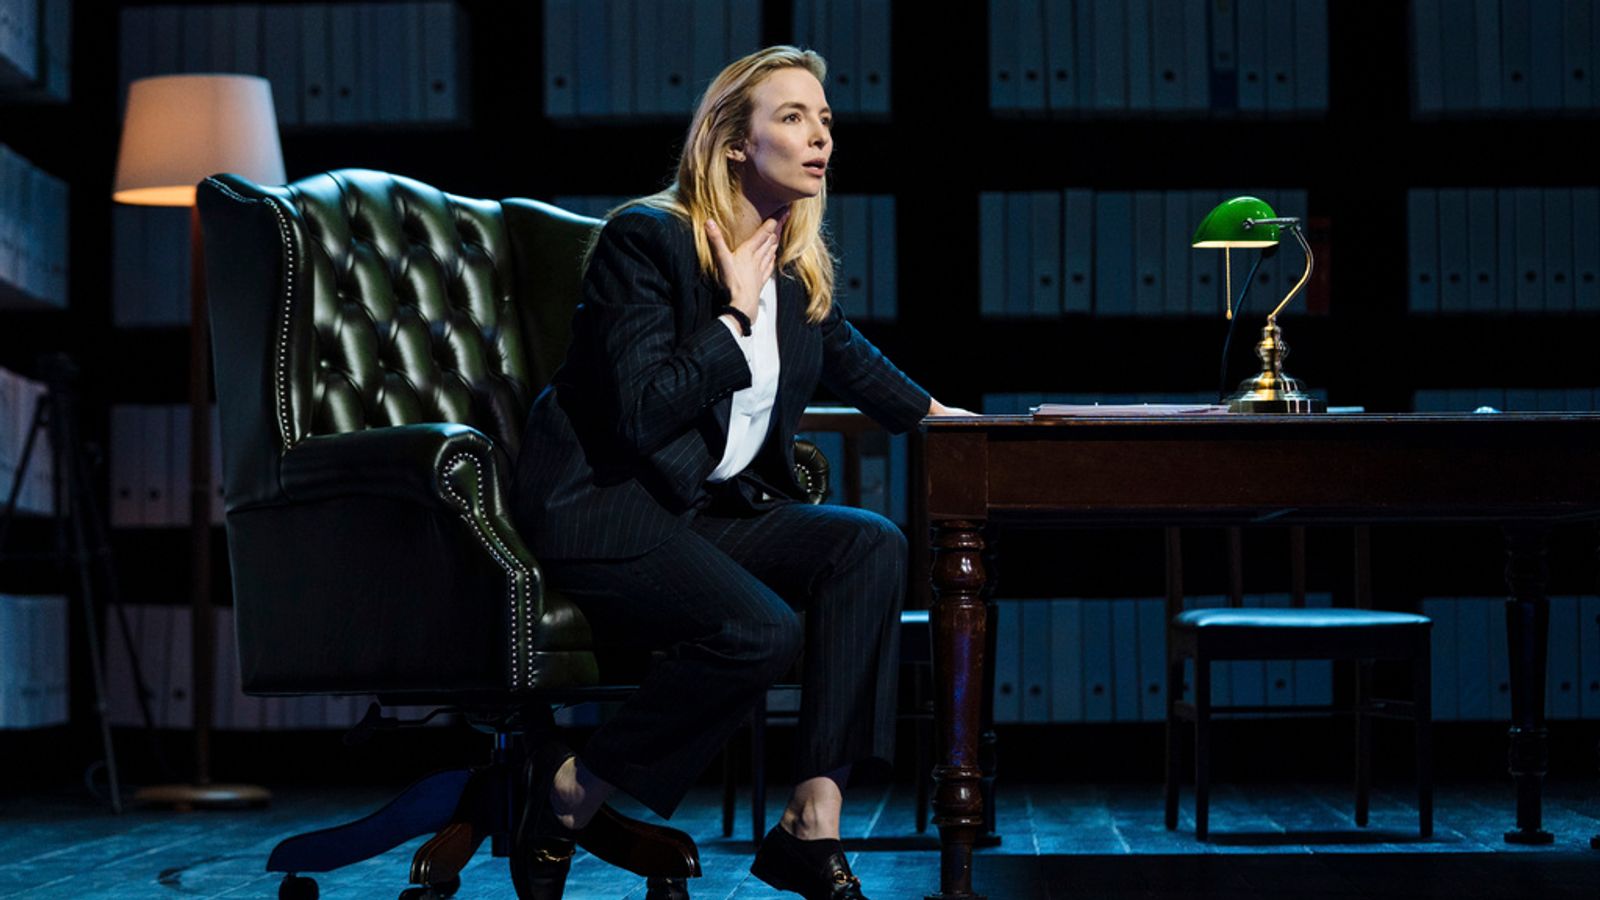 New York smoke: Jodie Comer halts Broadway show due to breathing difficulties